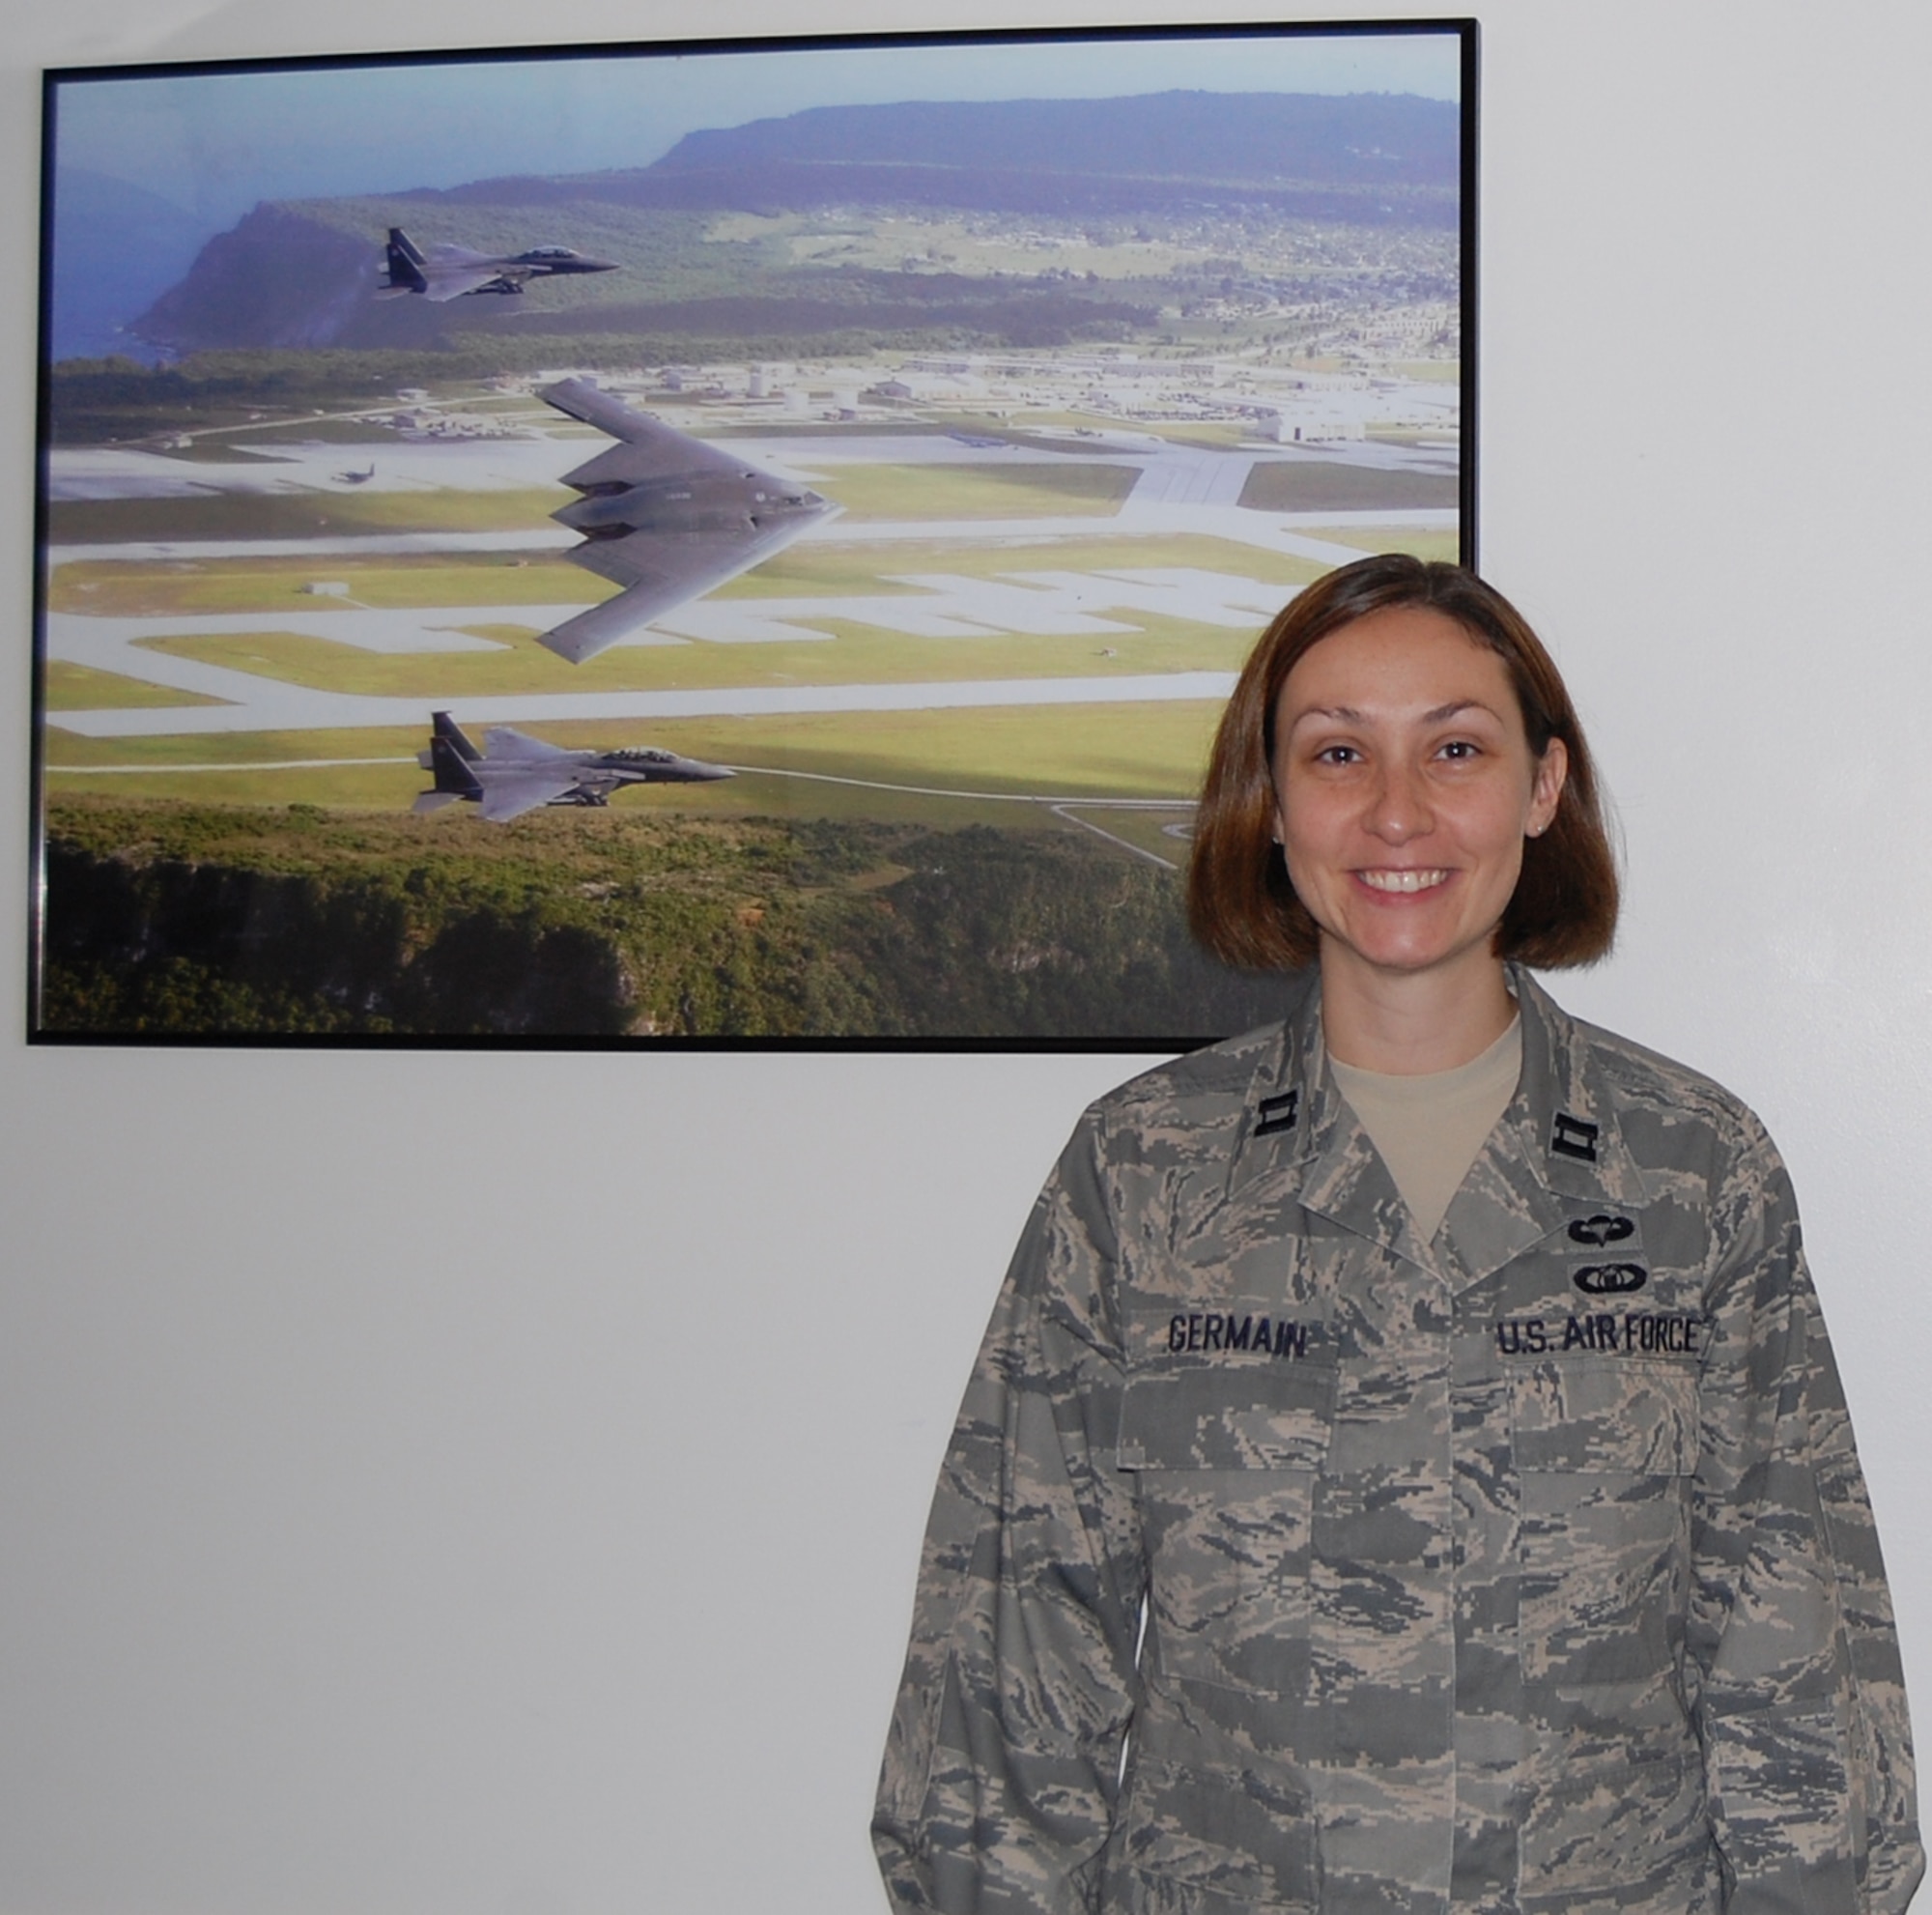 Capt. Catherine Germain has been chosen as the new 131st Bomb Wing Executive Officer. Captain Germain visited with Airmen at Lambert IAP, St. Louis, Mo. Sept 12, but will be working out of Whiteman Air Force Base, Warrensburg, Mo. (Photo by Senior Airman Jessica Donnelly)